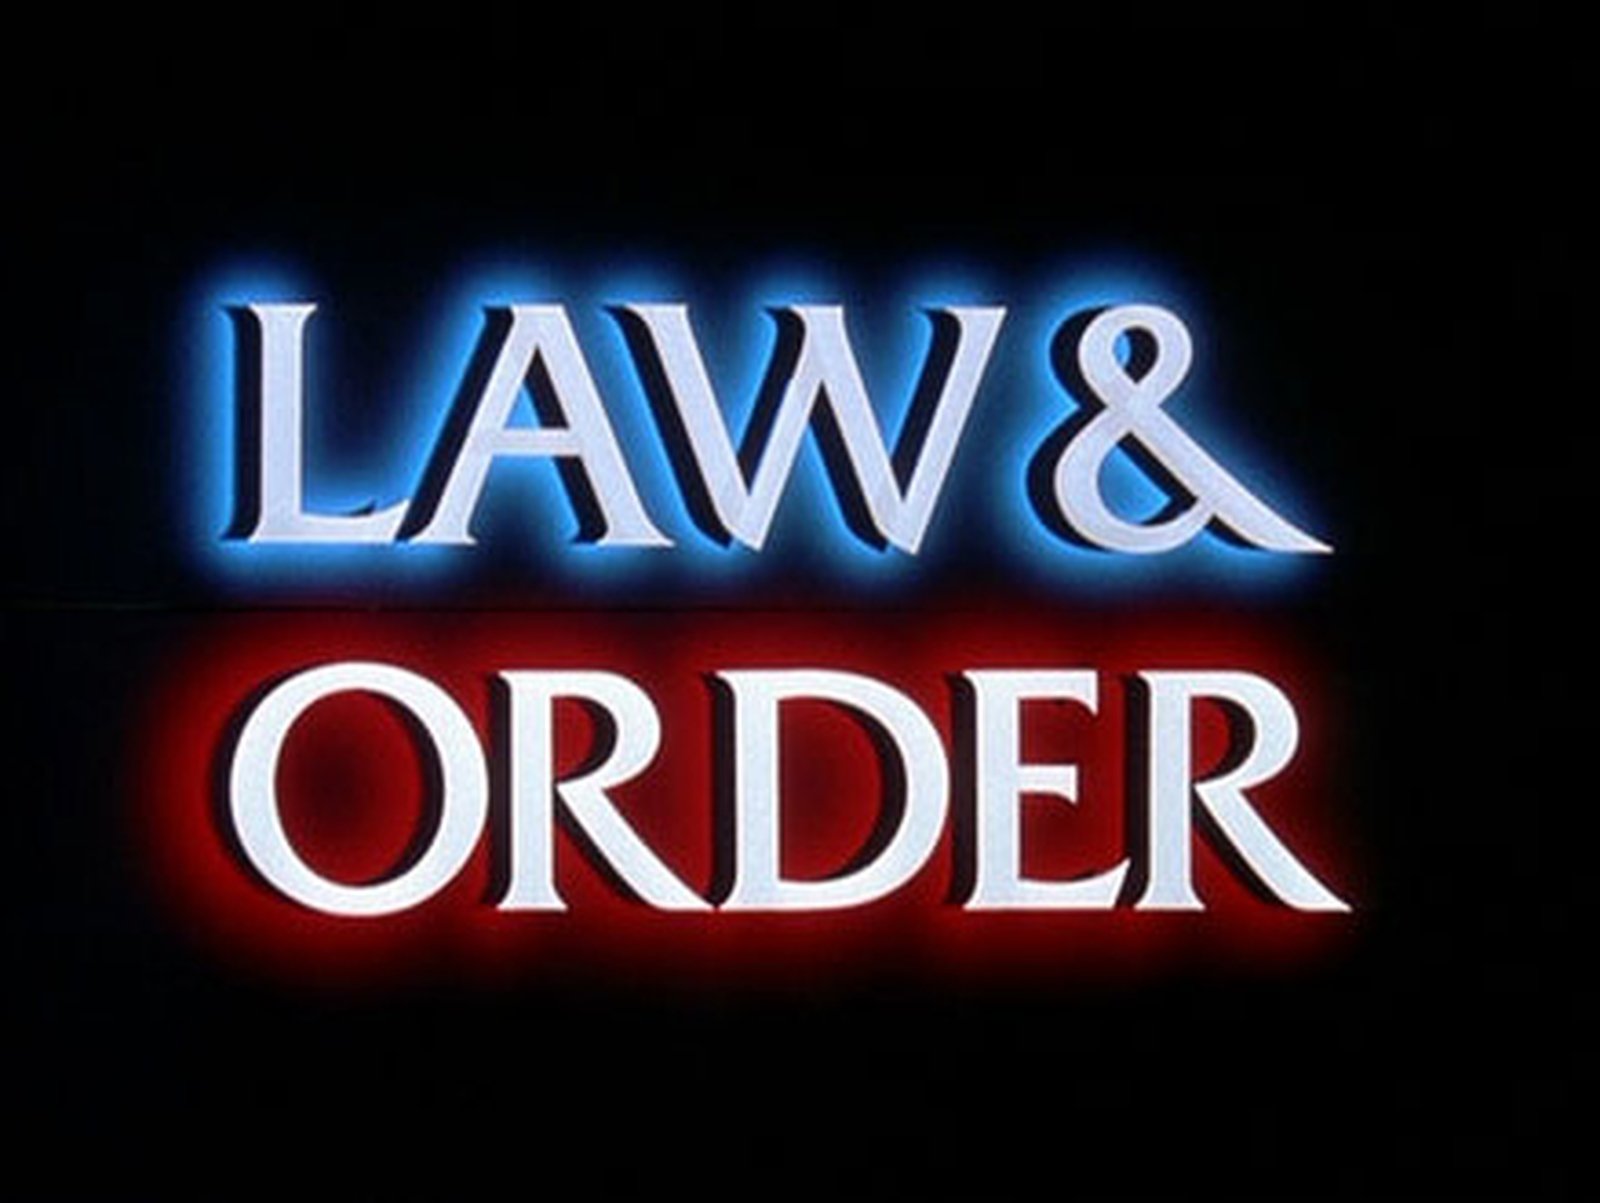 Steam law and order фото 7